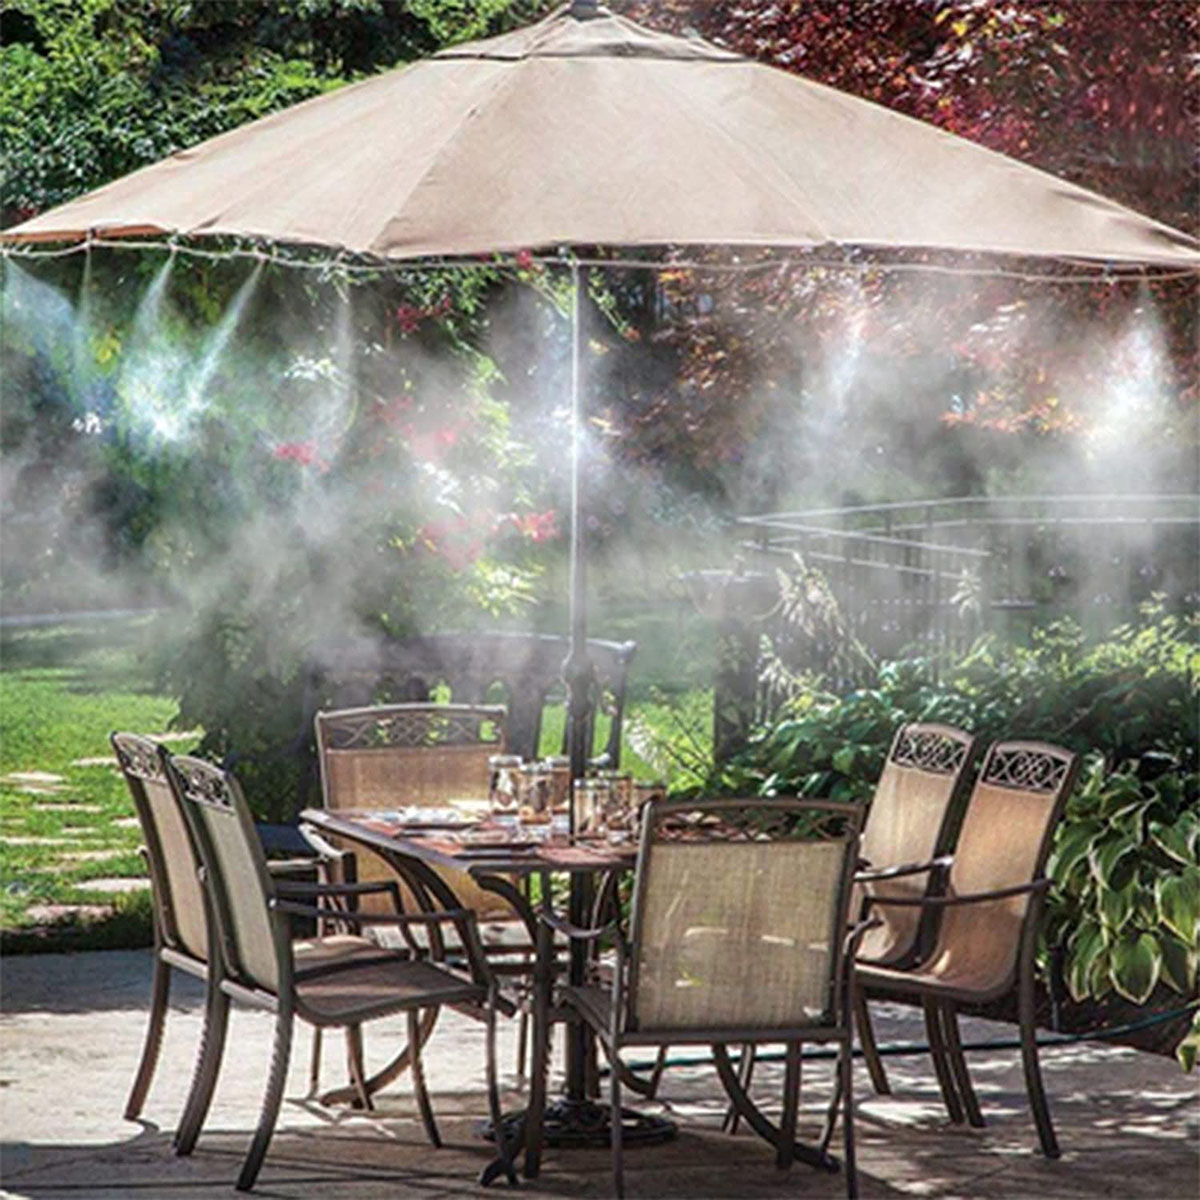 Water-Misting-Cooling-System-Mist-Sprinkler-Nozzle-Plant-Garden-Outdoor-Water-Spray-Patio-Misters-fo-1862026-5